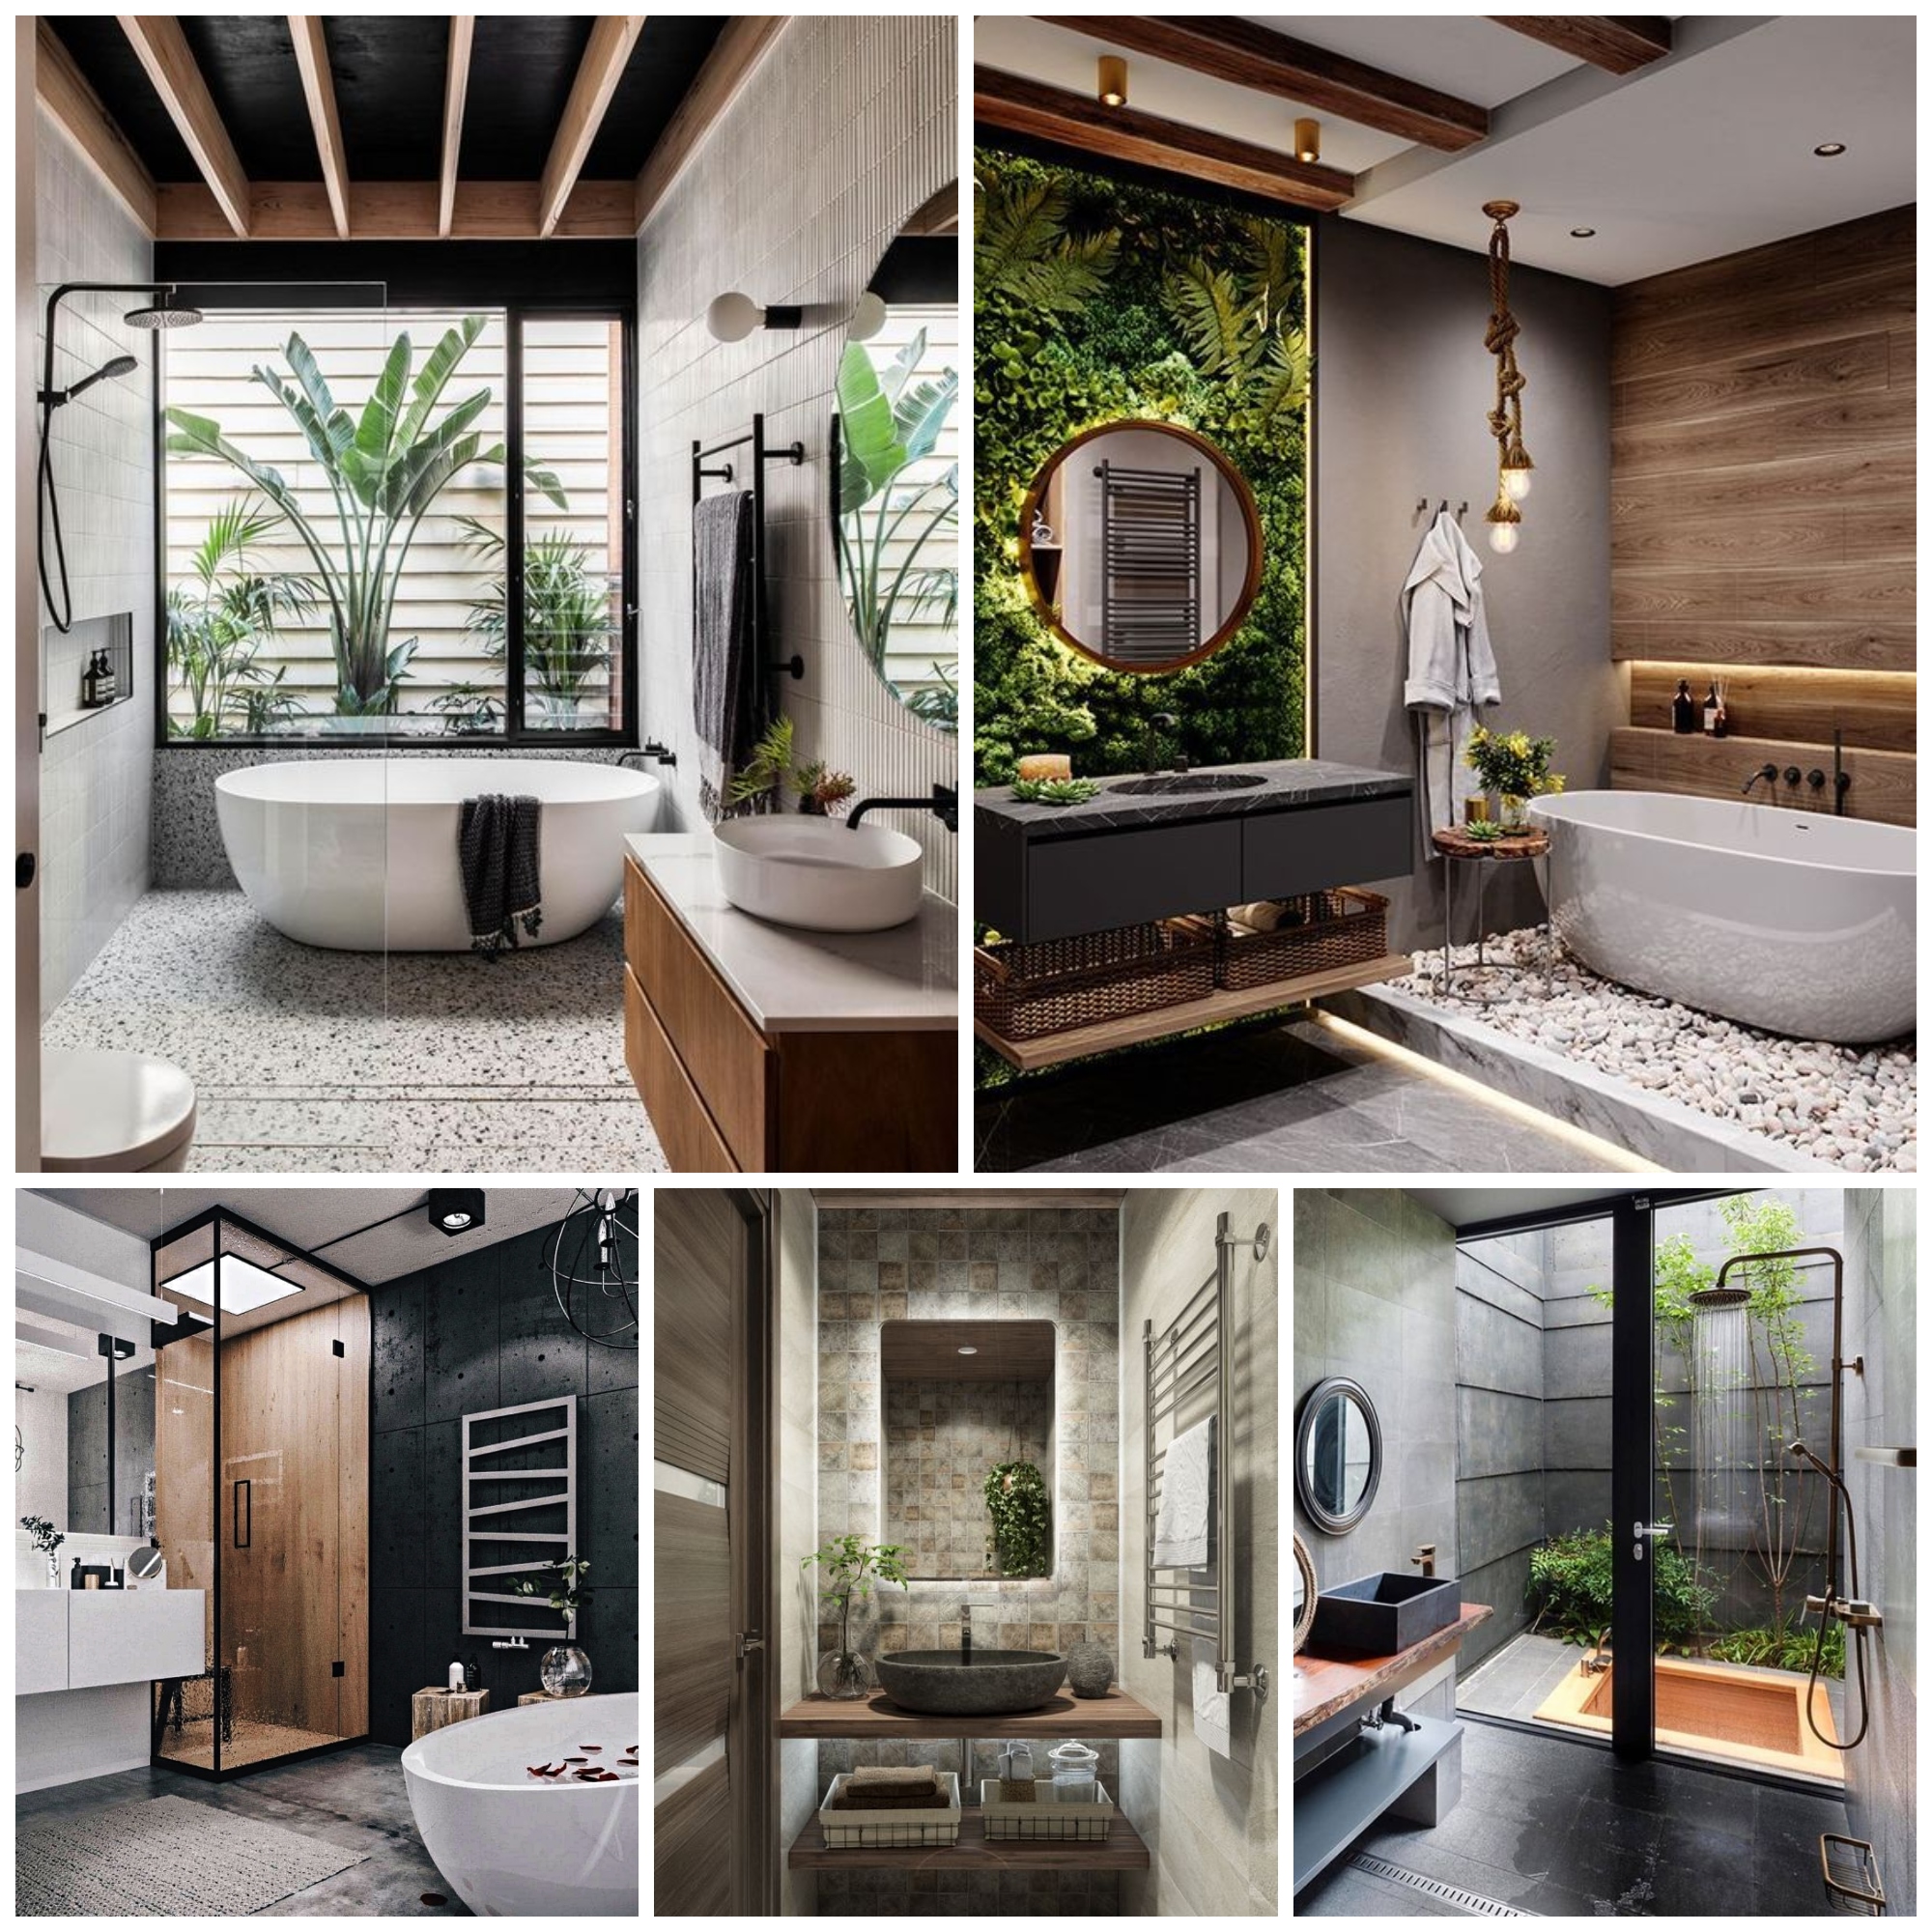 Modern Bathroom Ideas to Help You Design a Personal Oasis